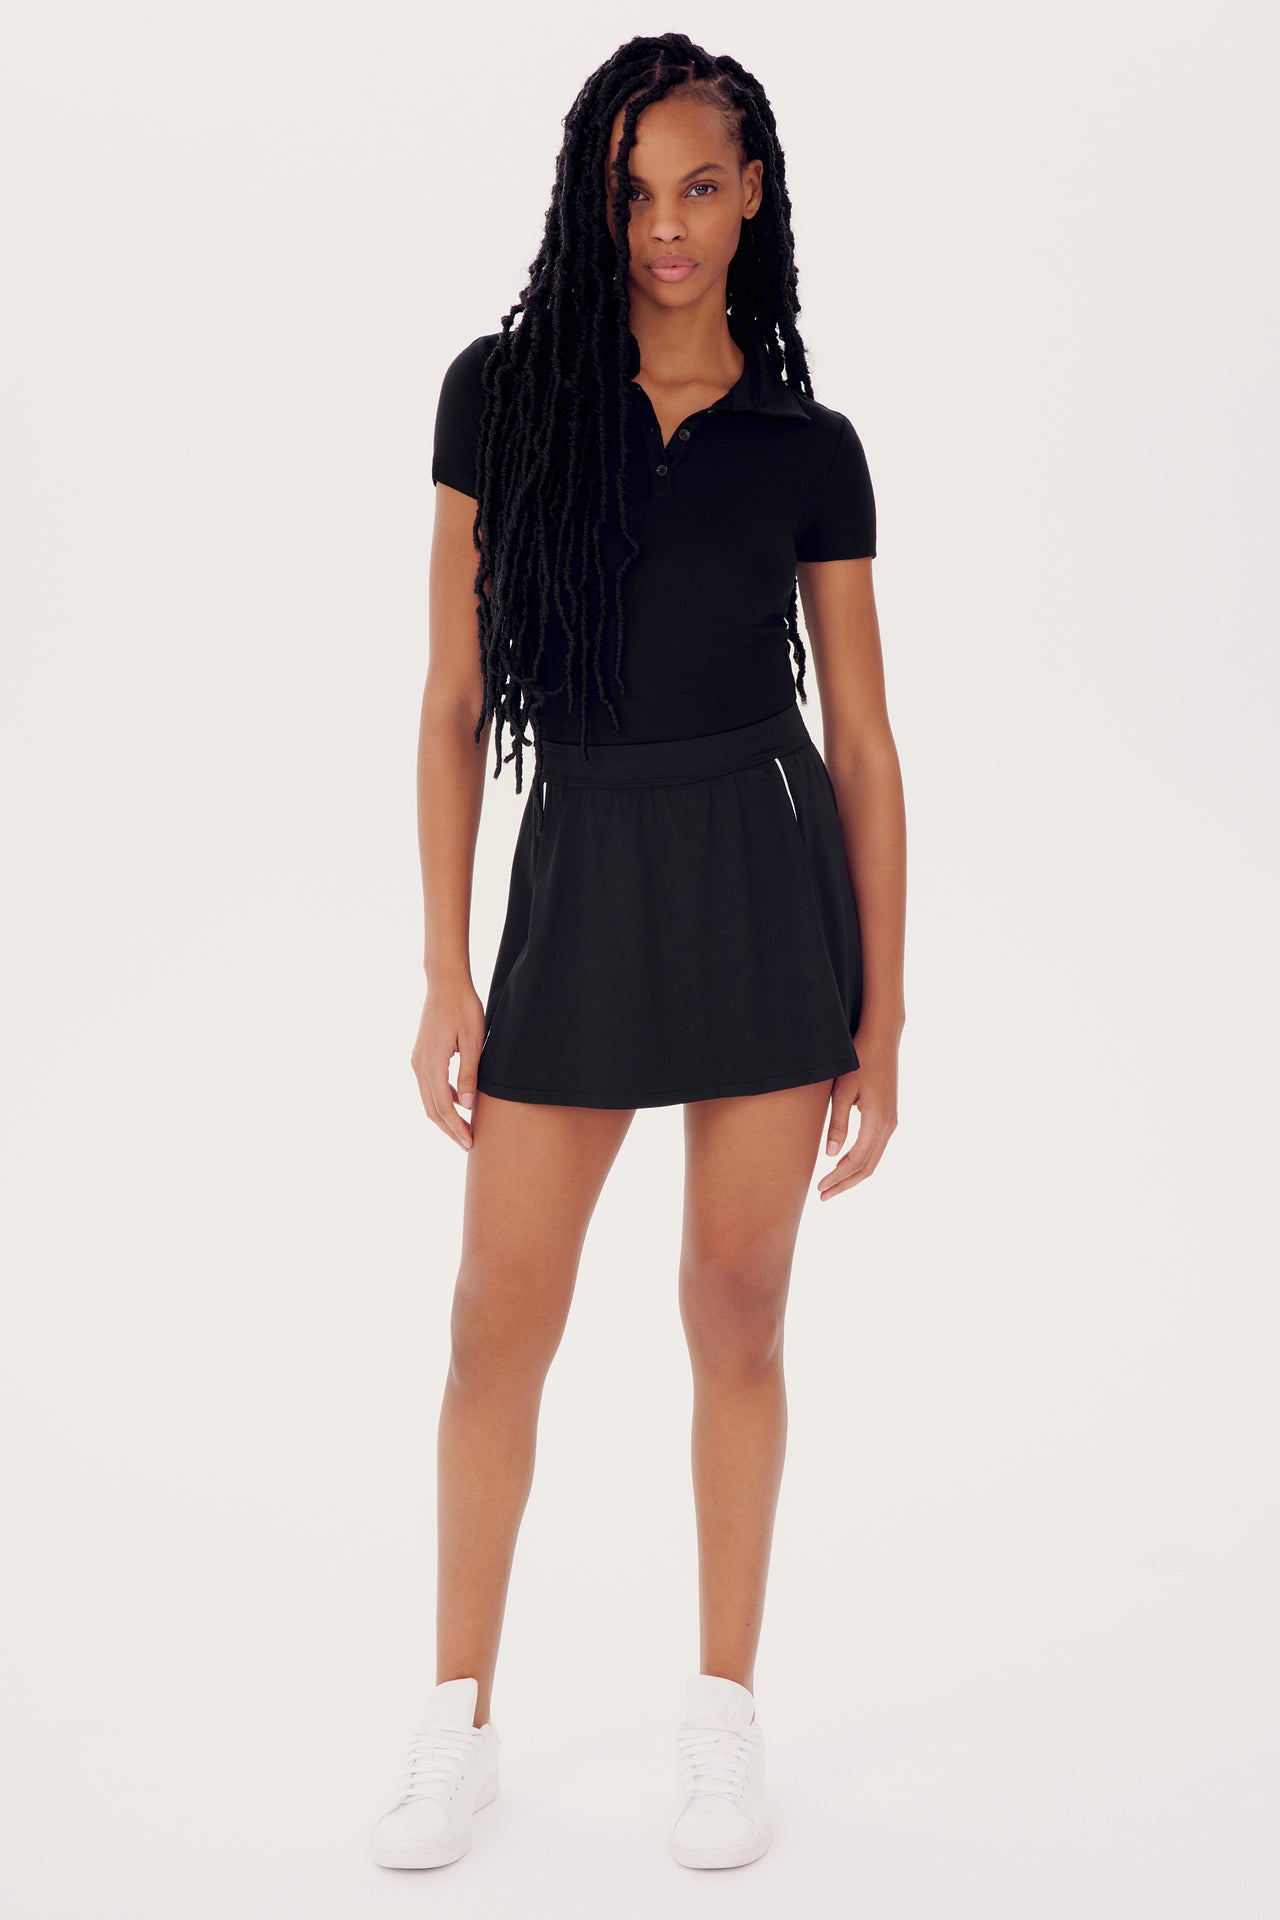 A woman in a black polo shirt and SPLITS59's Venus High Waist Rigor Skort w/Piping - Black stands facing the camera, wearing white sneakers, with long braided hair.